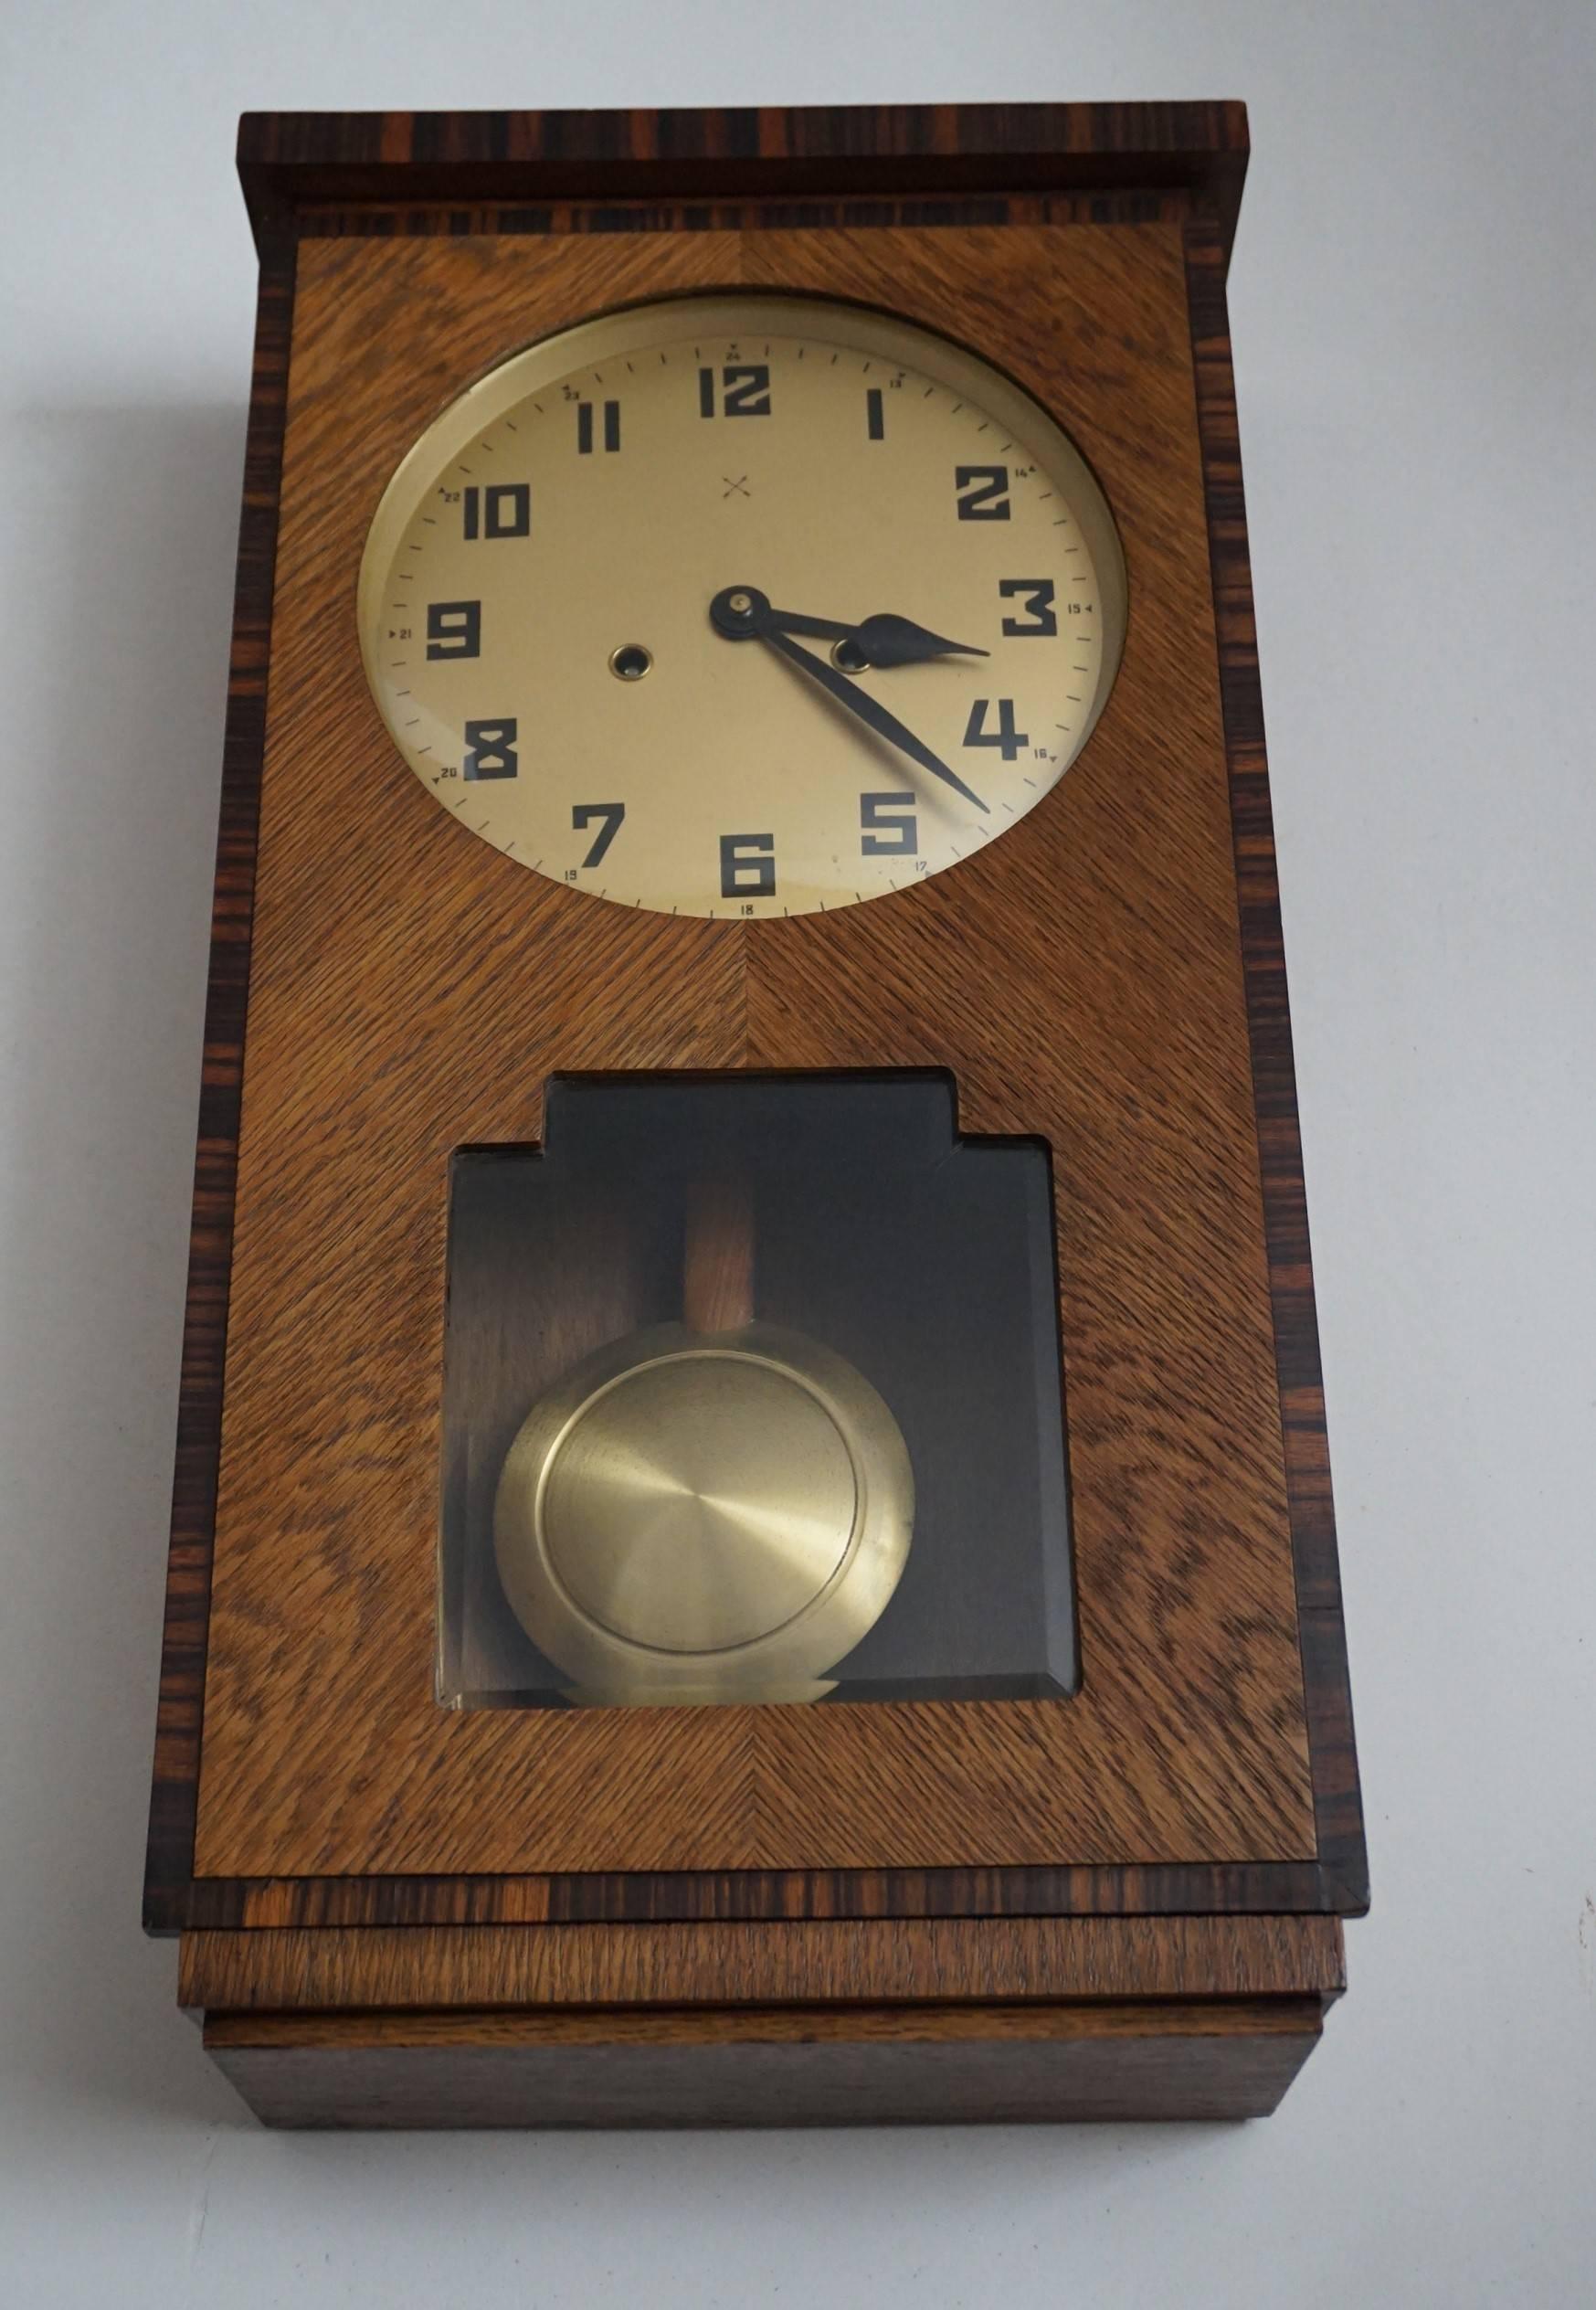 Early 20th century, great condition Art Deco wall clock.

Over the years we have sold a few dozen Amsterdam School pendulums. They were all beautiful and unique in design, but they ARE out there. However, wall clocks from this typical Dutch Art Deco